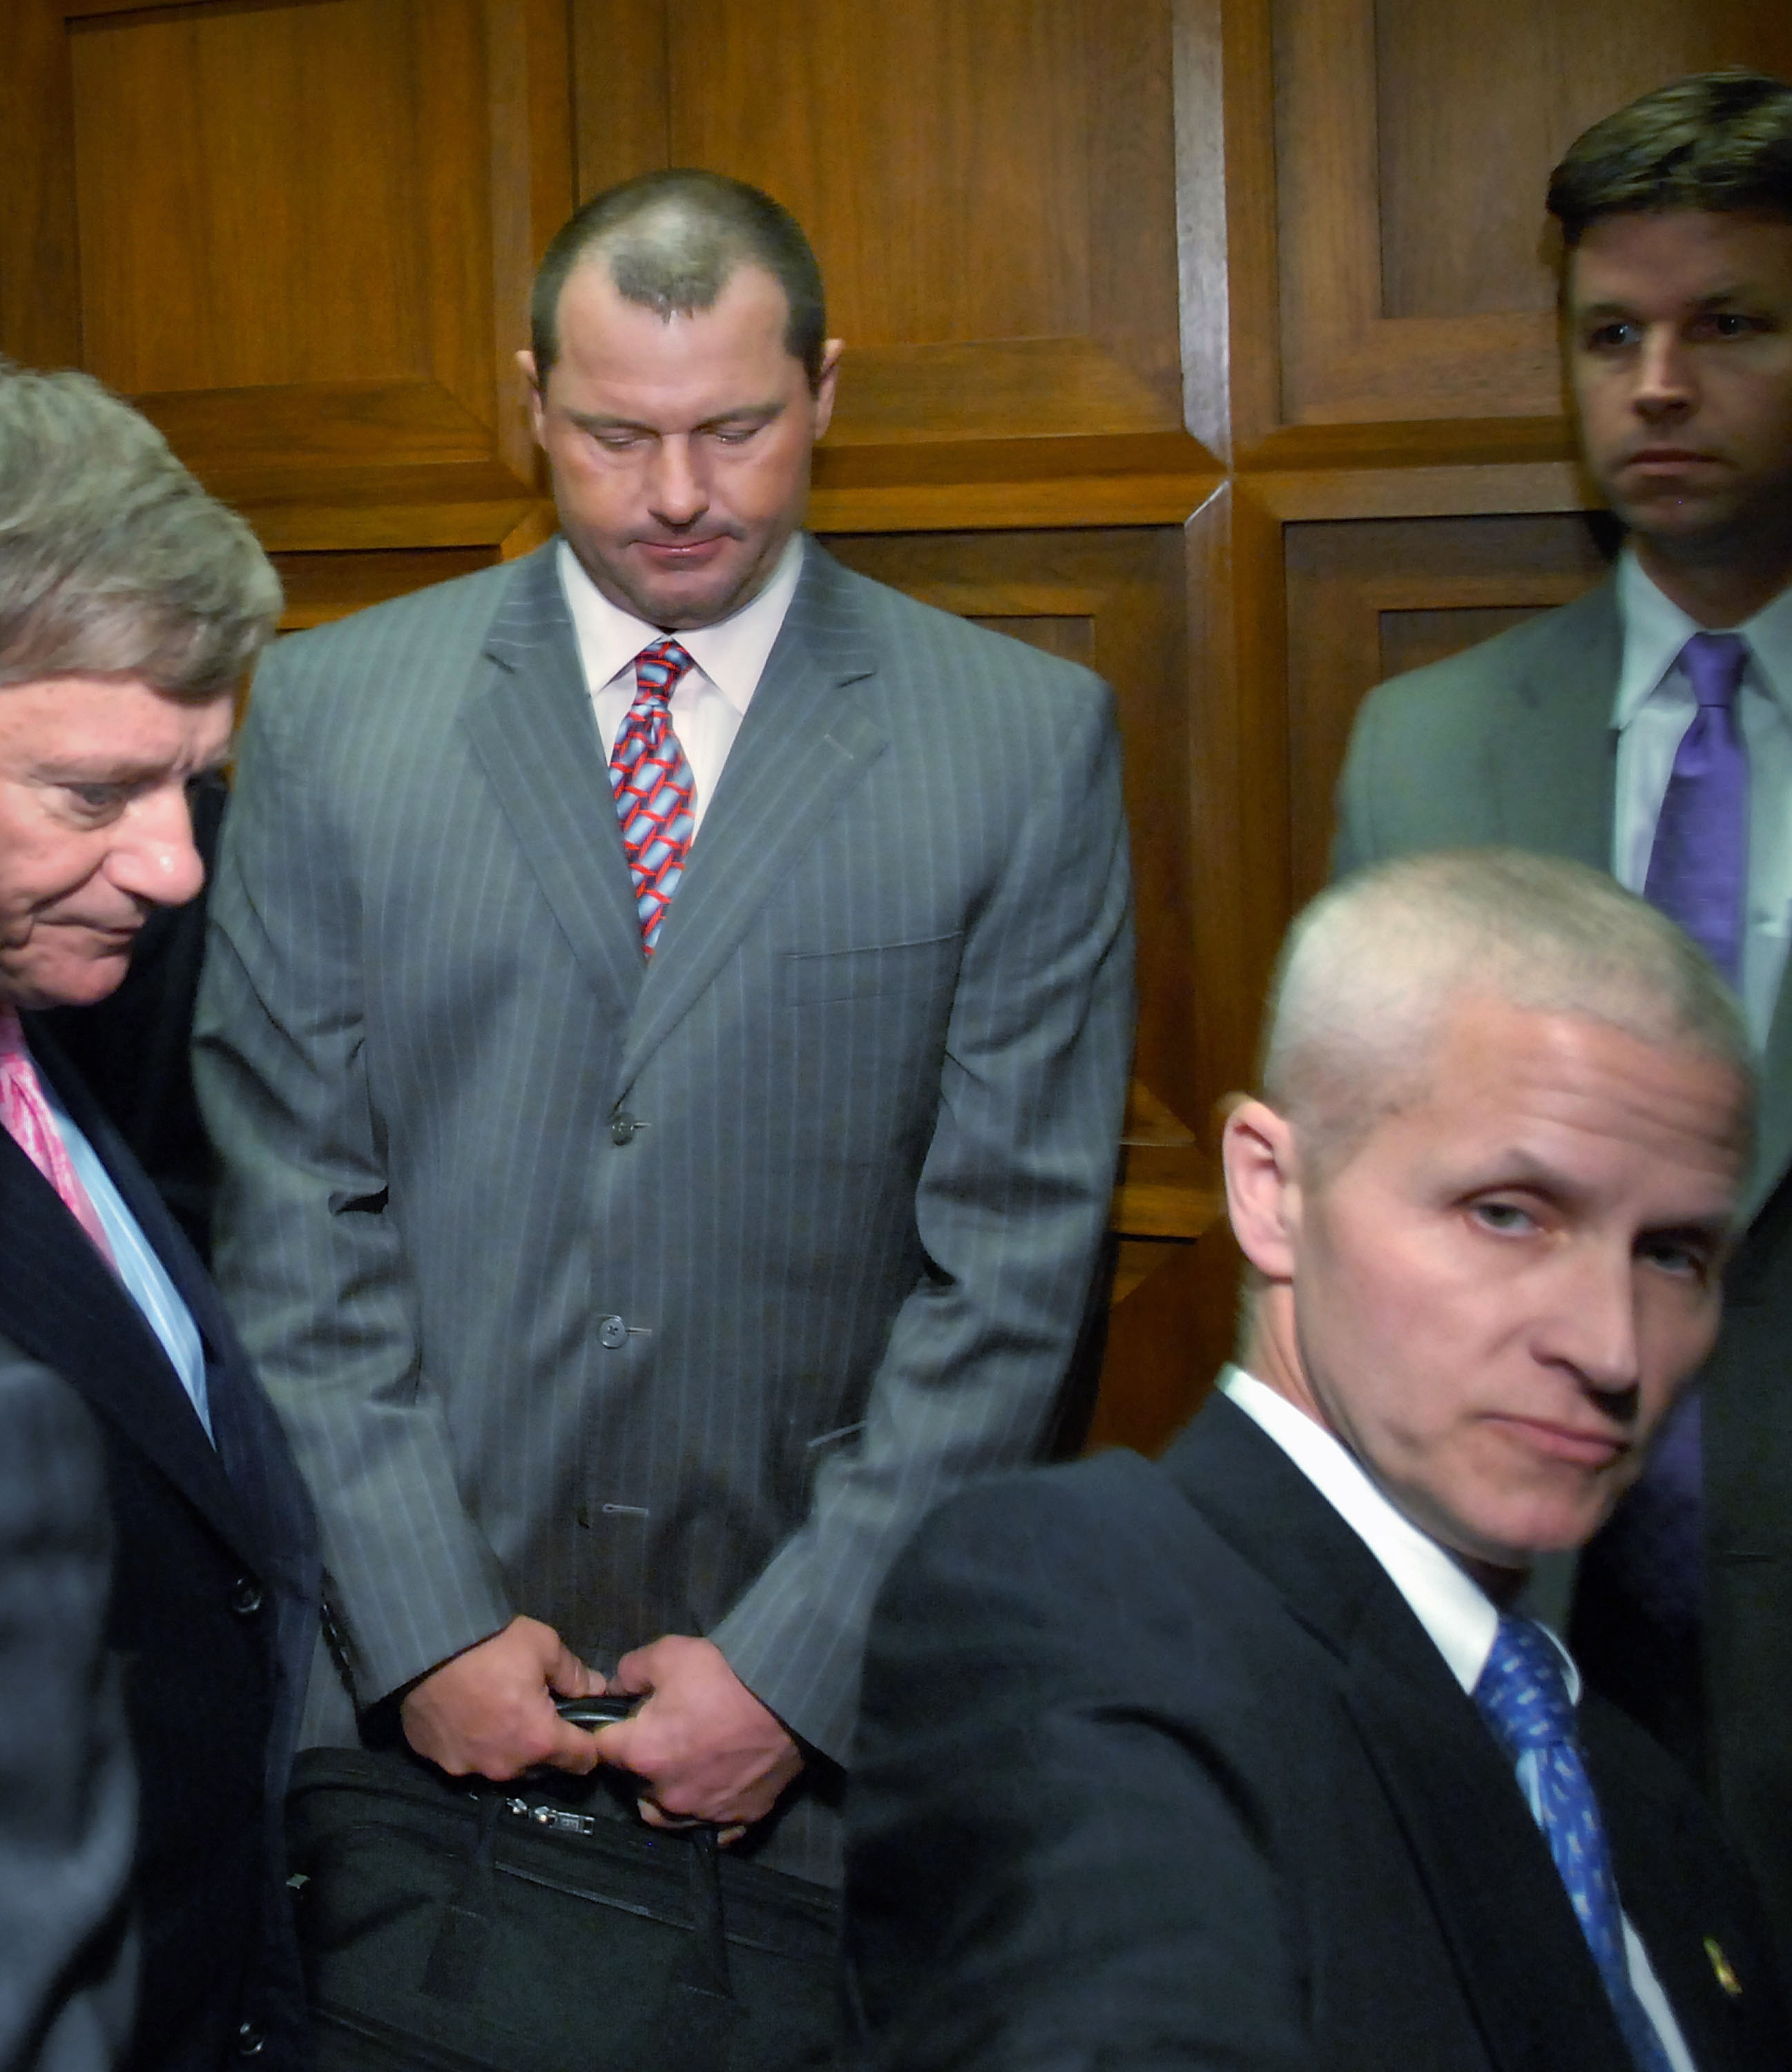 WASHINGTON - FEBRUARY 05:  Former New York Yankees pitcher Roger Clemens (2nd L) departs on an elevator after being deposed by the House Oversight and Government Reform Committee about steroid use in Major League Baseball, February 5, 2008 in Washington.